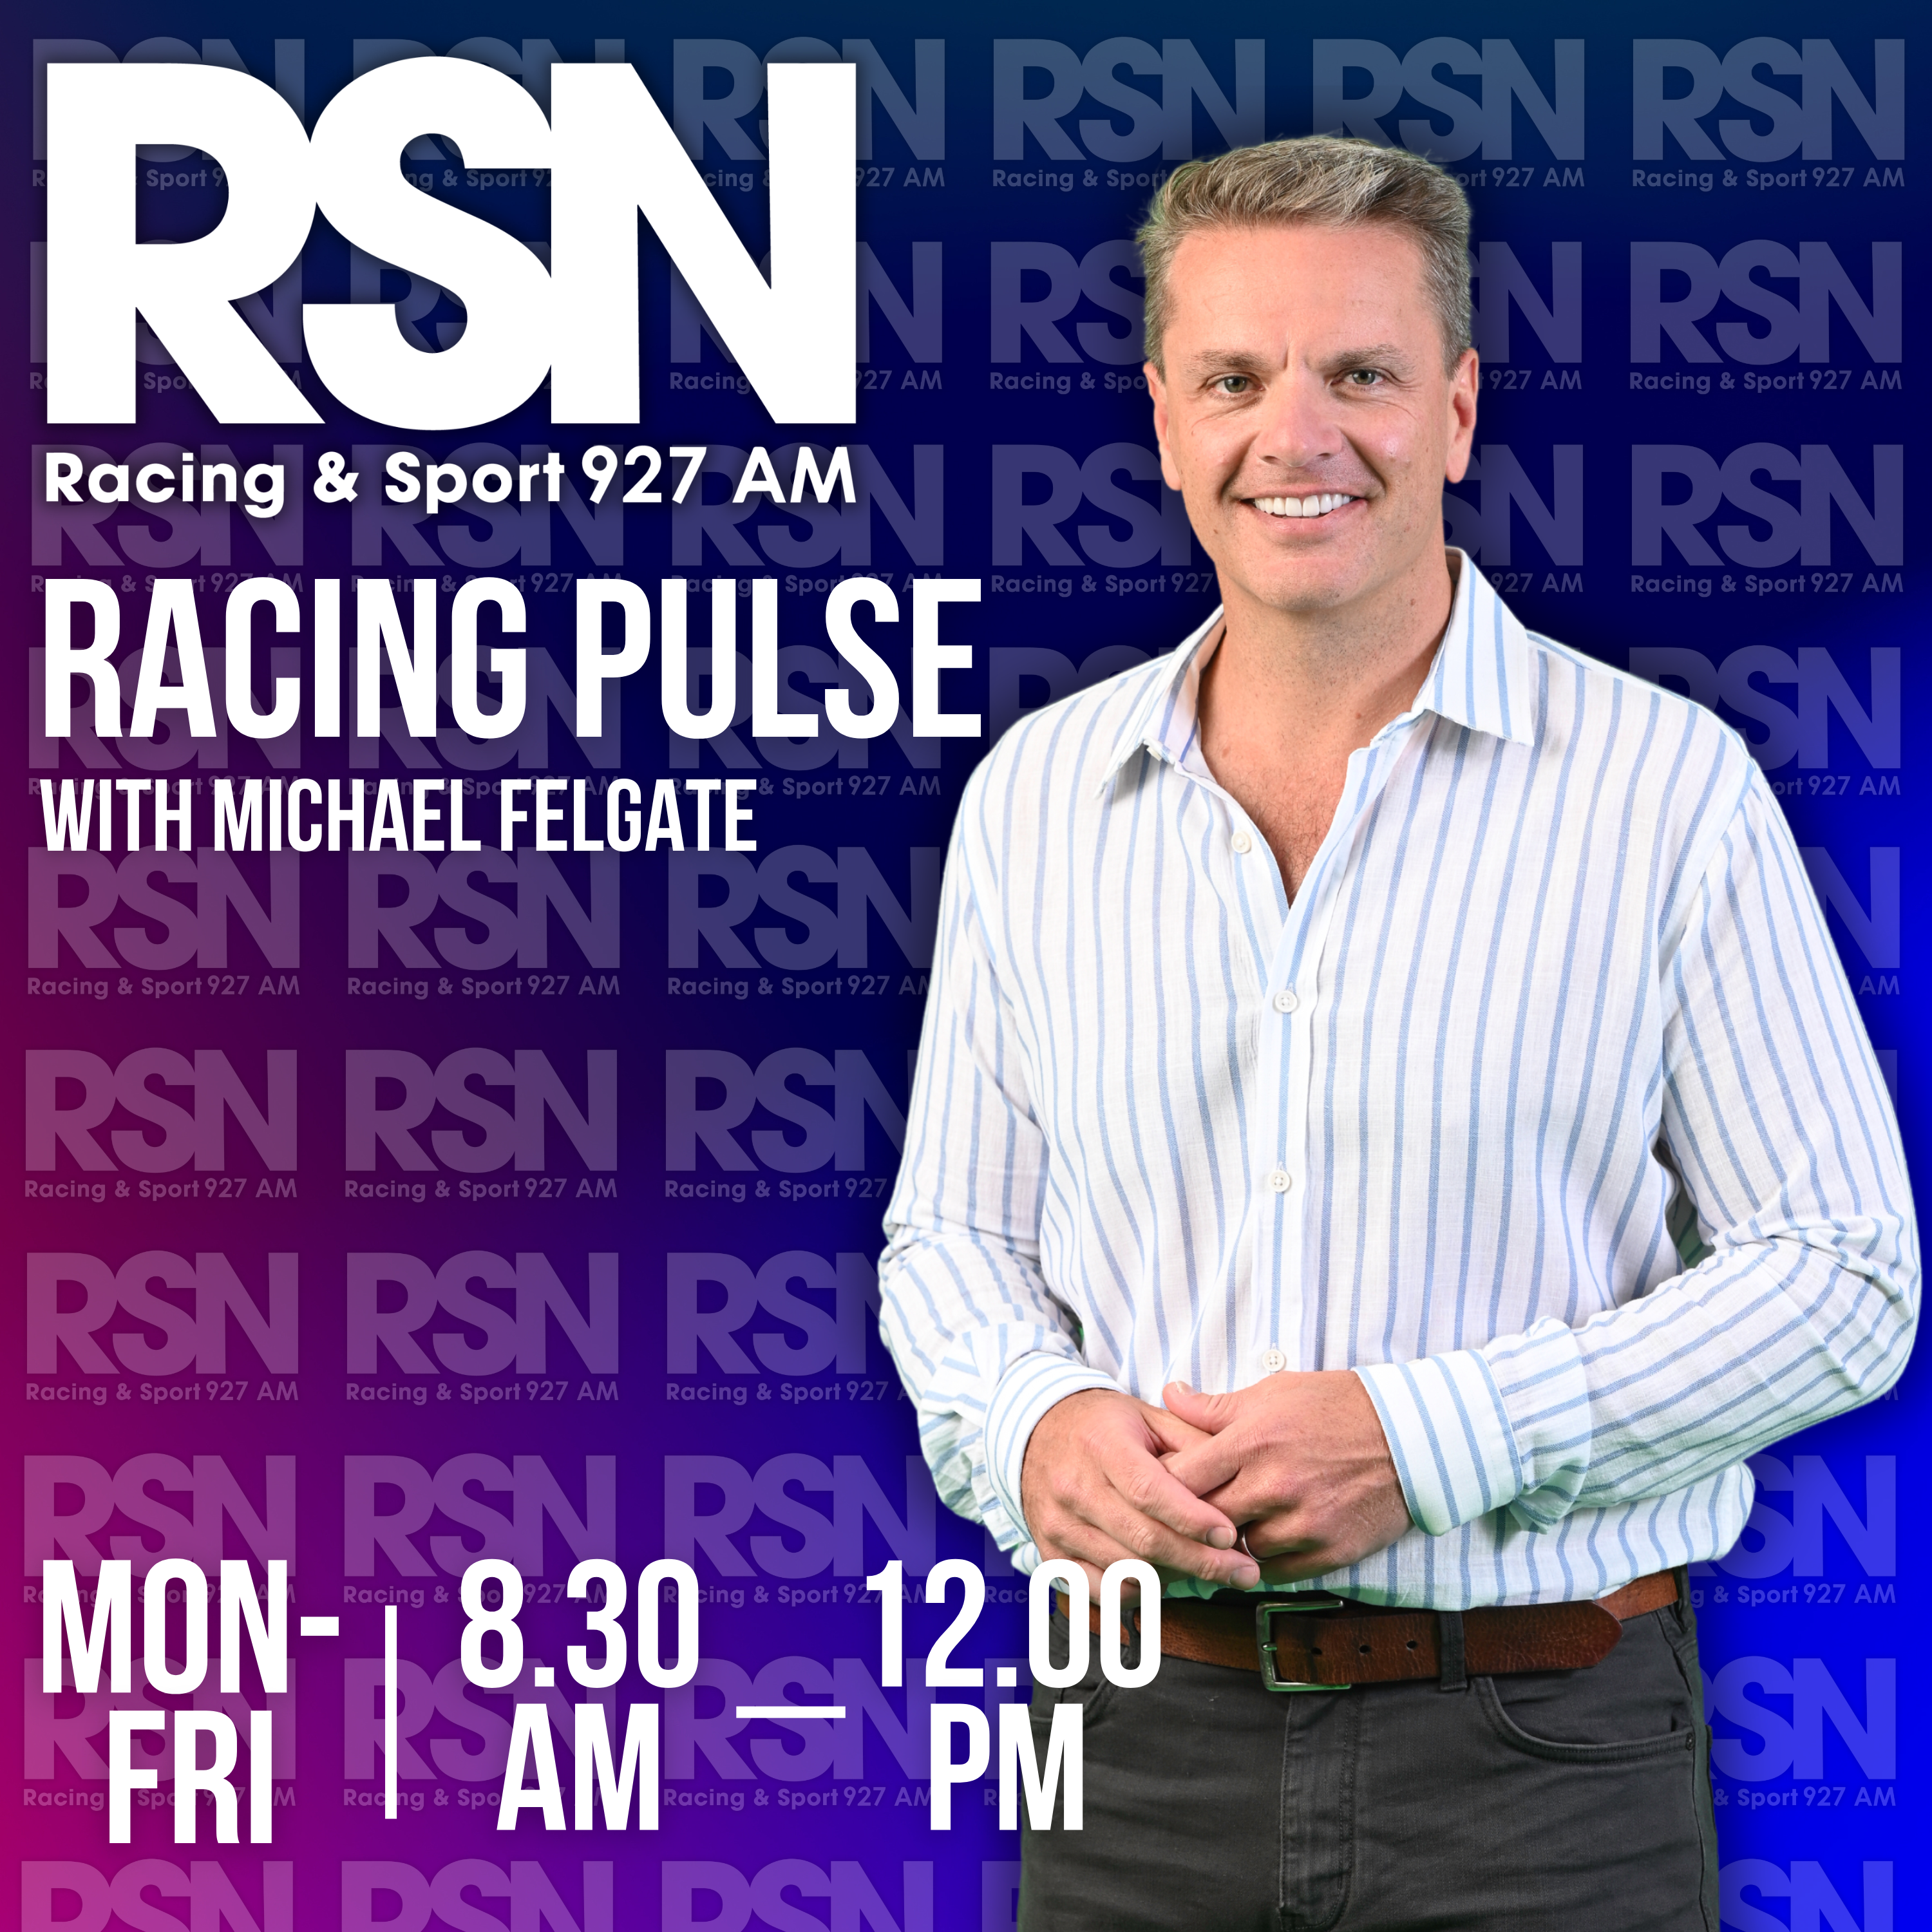 Malua Racing's Assistant trainer Will Larkin joined RSN for an extended chat